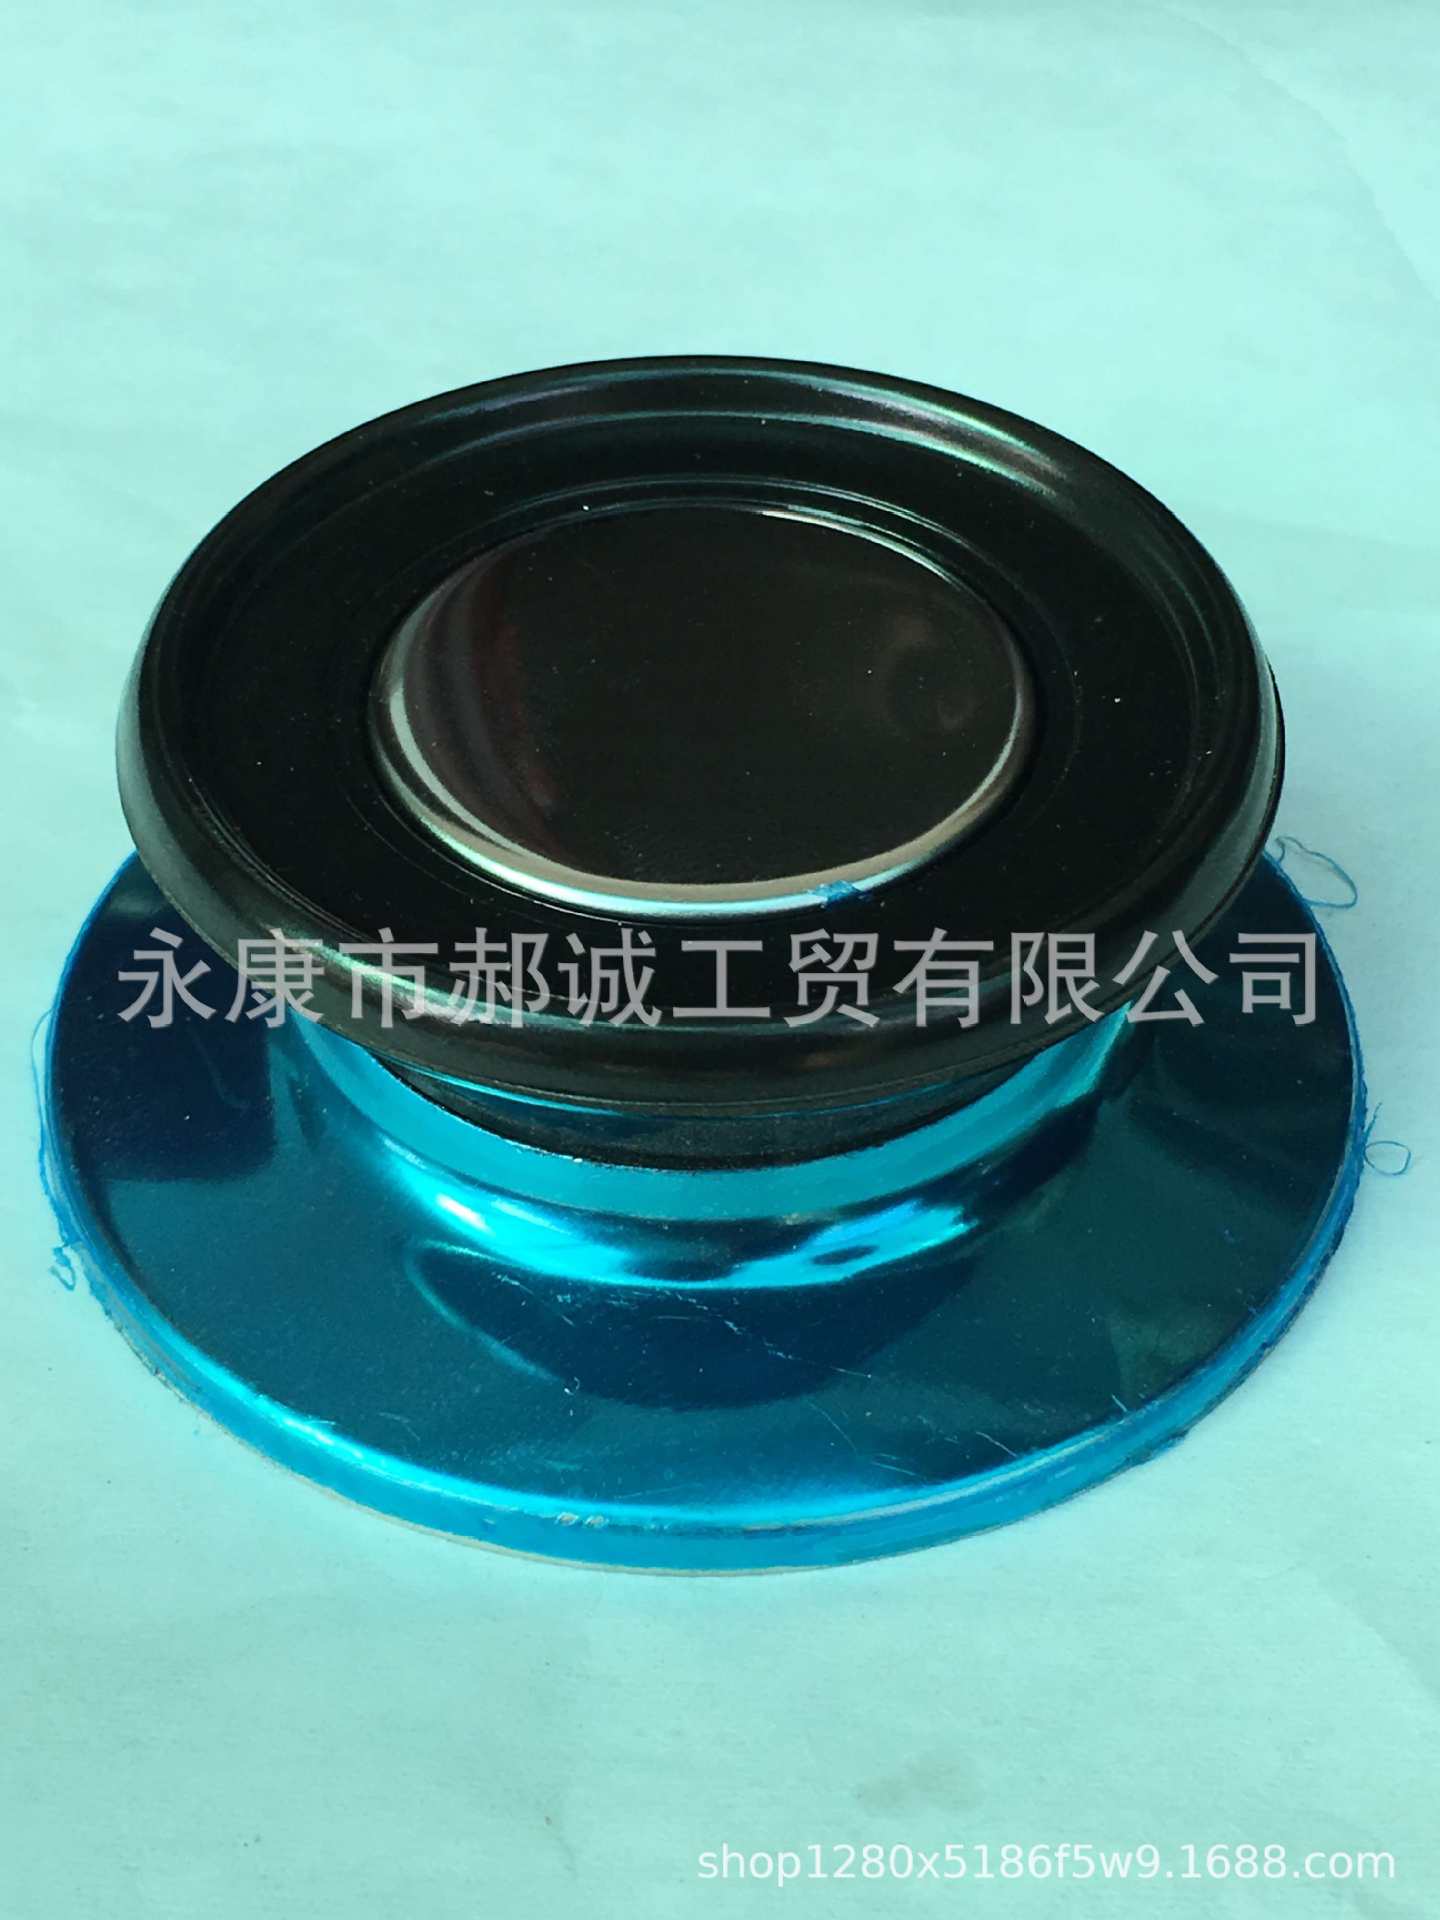 boutique recommend high-grade stainless steel non-stick wok pan cover button cover beads non-stick pan pot accessories factory direct sales